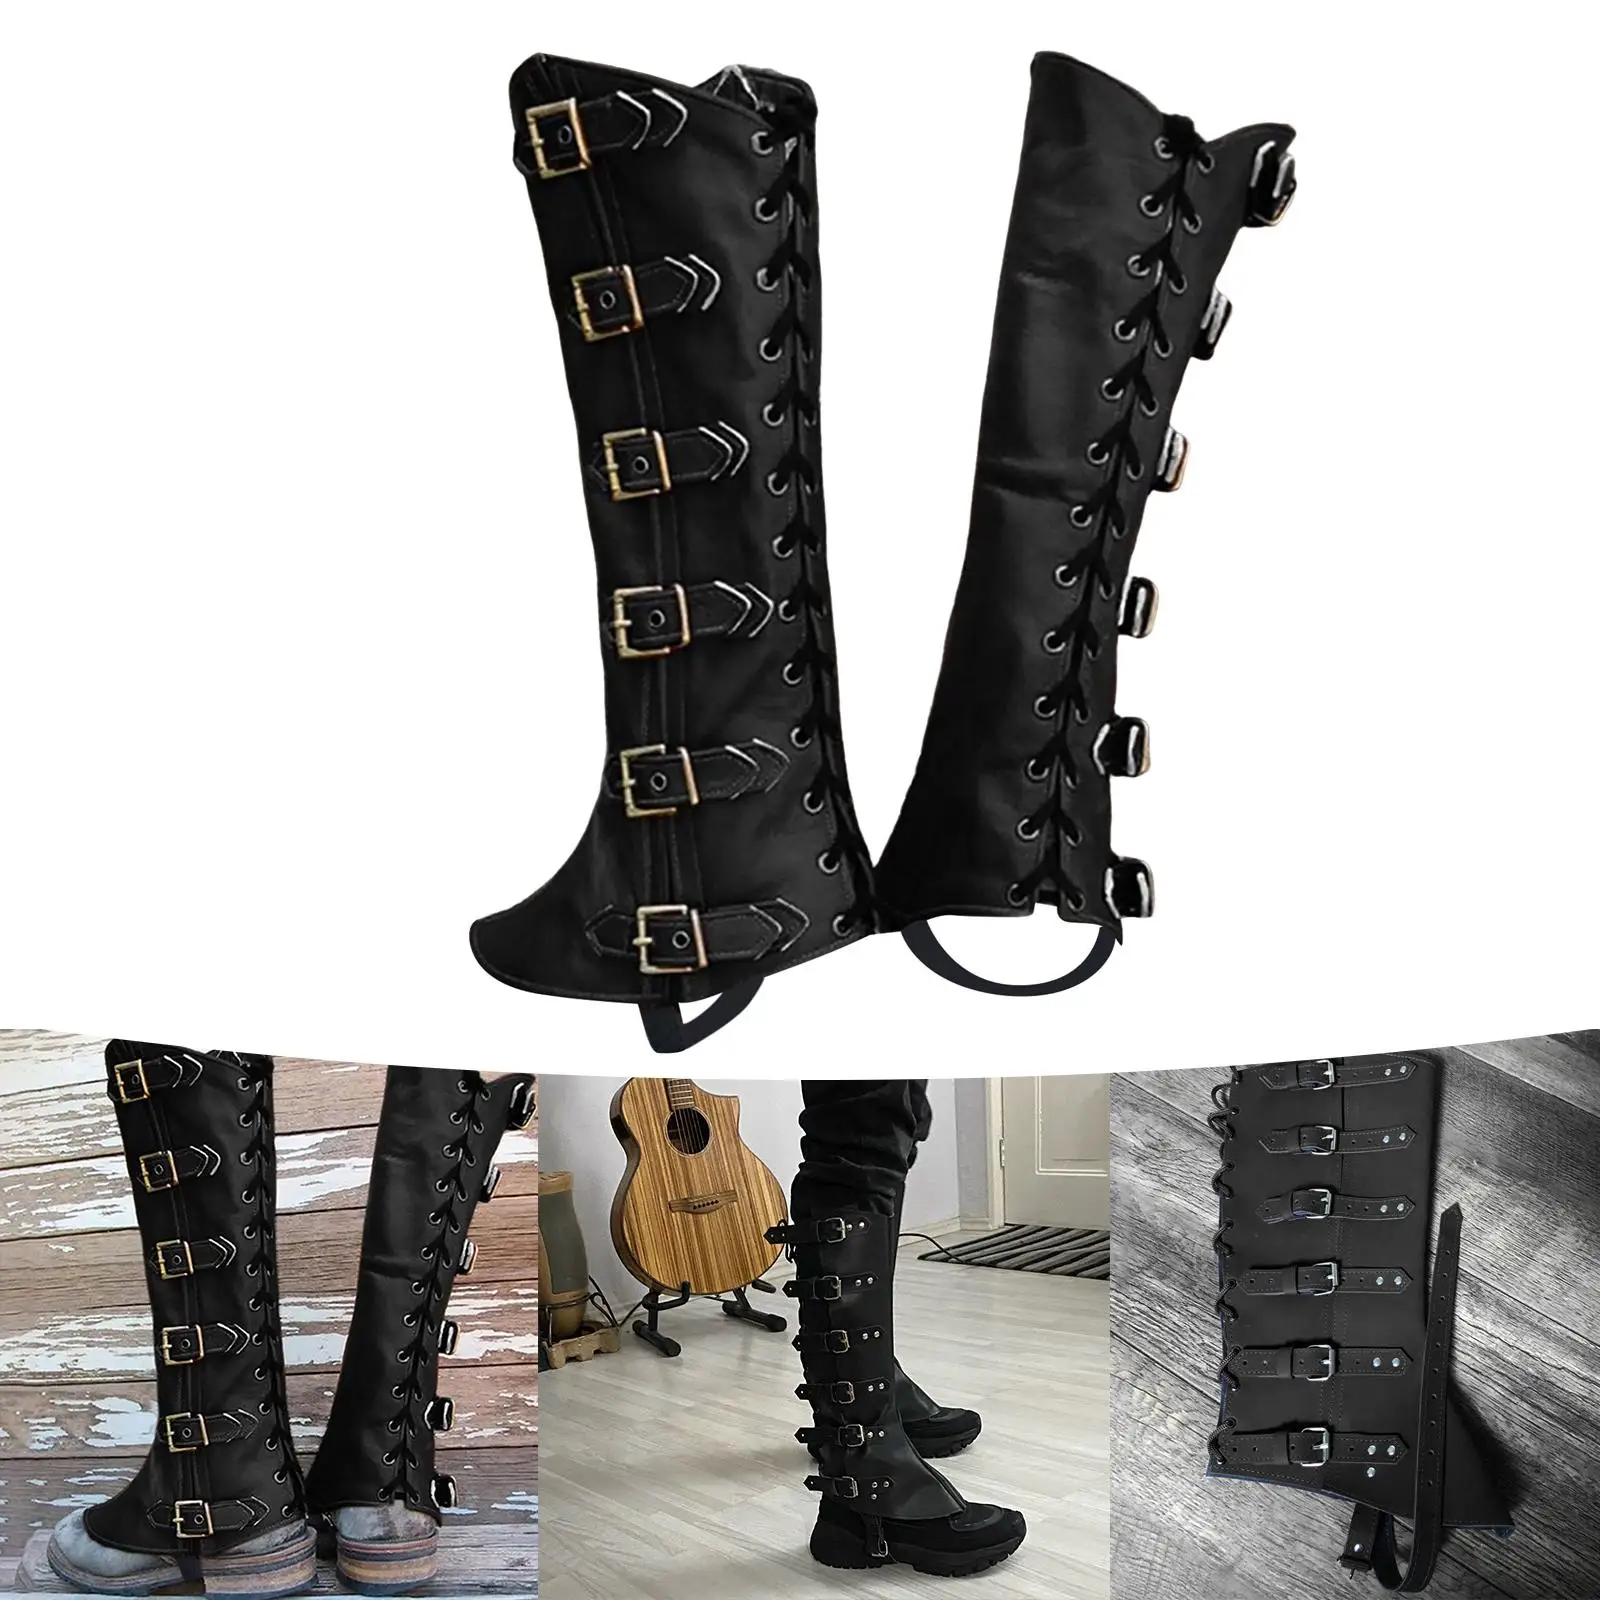 PU Leg Guard Shoe Steampunk Warrior Medieval Gothic Shoe Cover for Masquerade Knights Costume Accessory Cosplay Props Women Men